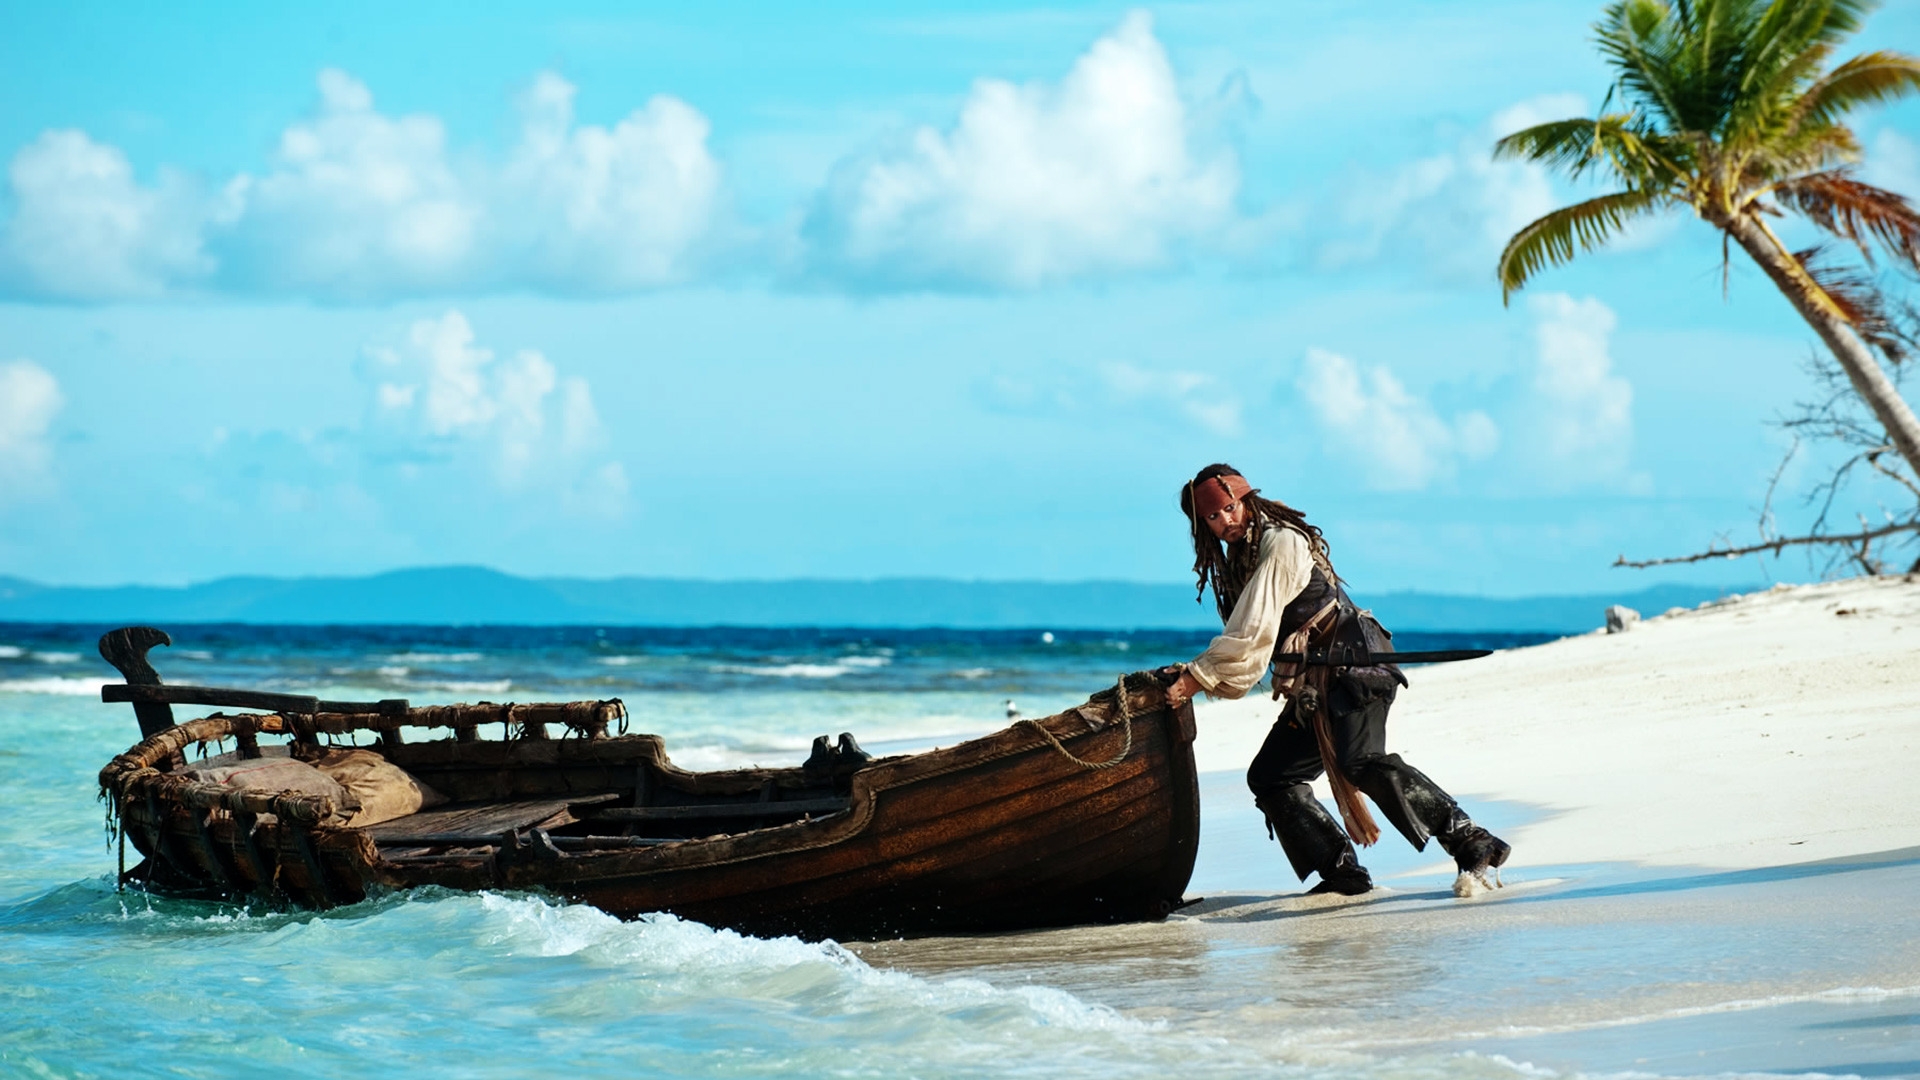 Jack Sparrow Pirates of the Caribbean 4 for 1920 x 1080 HDTV 1080p resolution